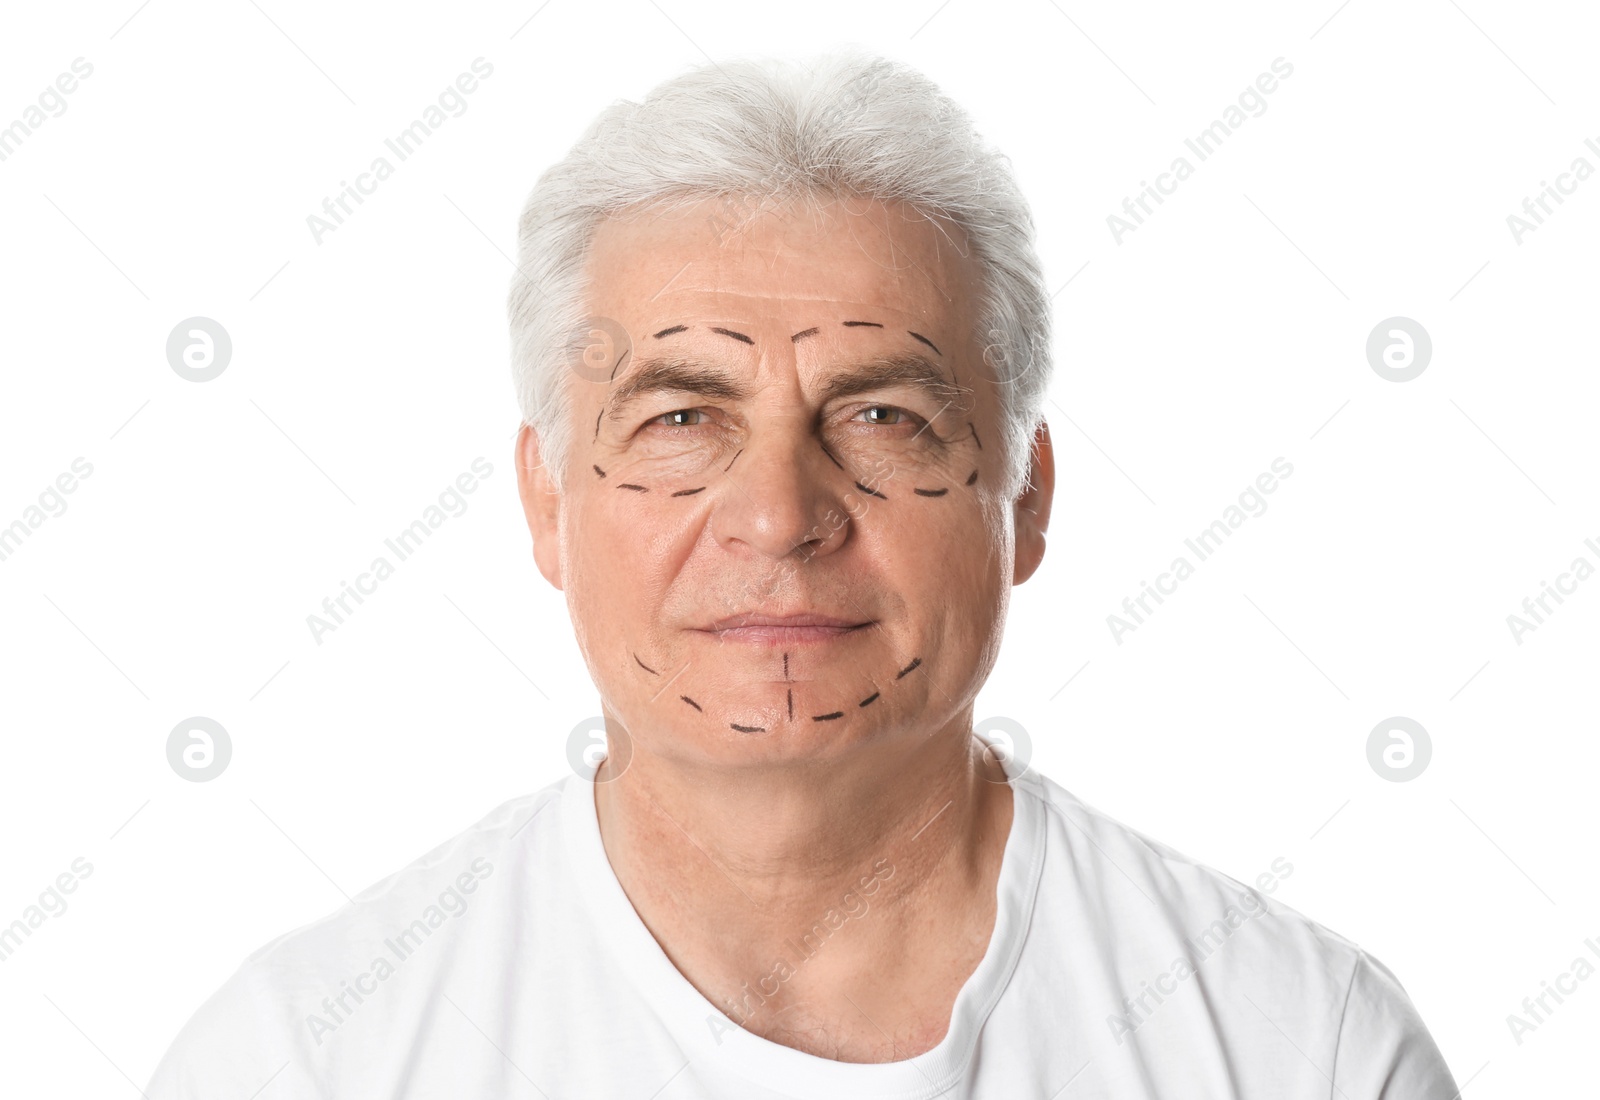 Photo of Mature man with marks on face for cosmetic surgery operation against white background